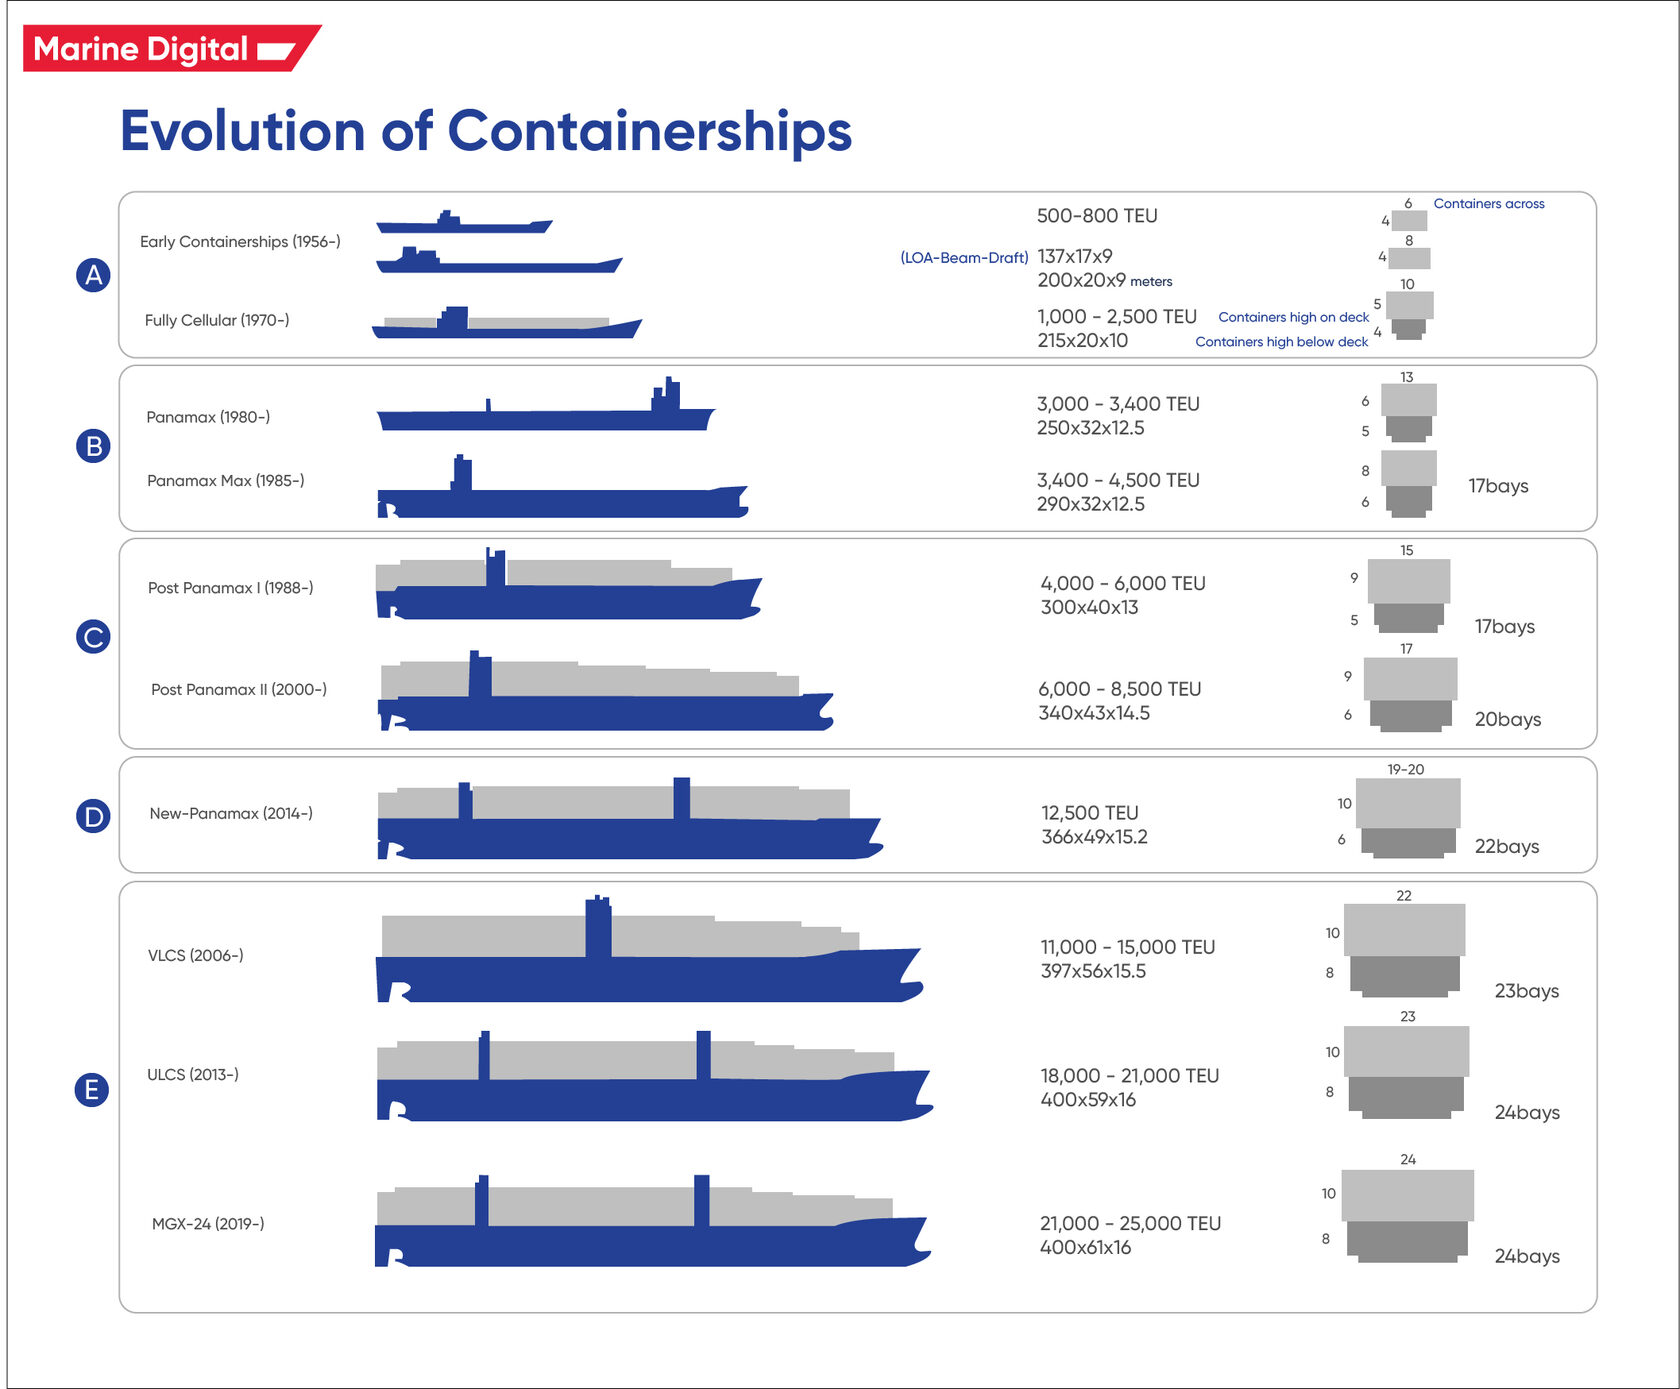 Evolution of Containerships